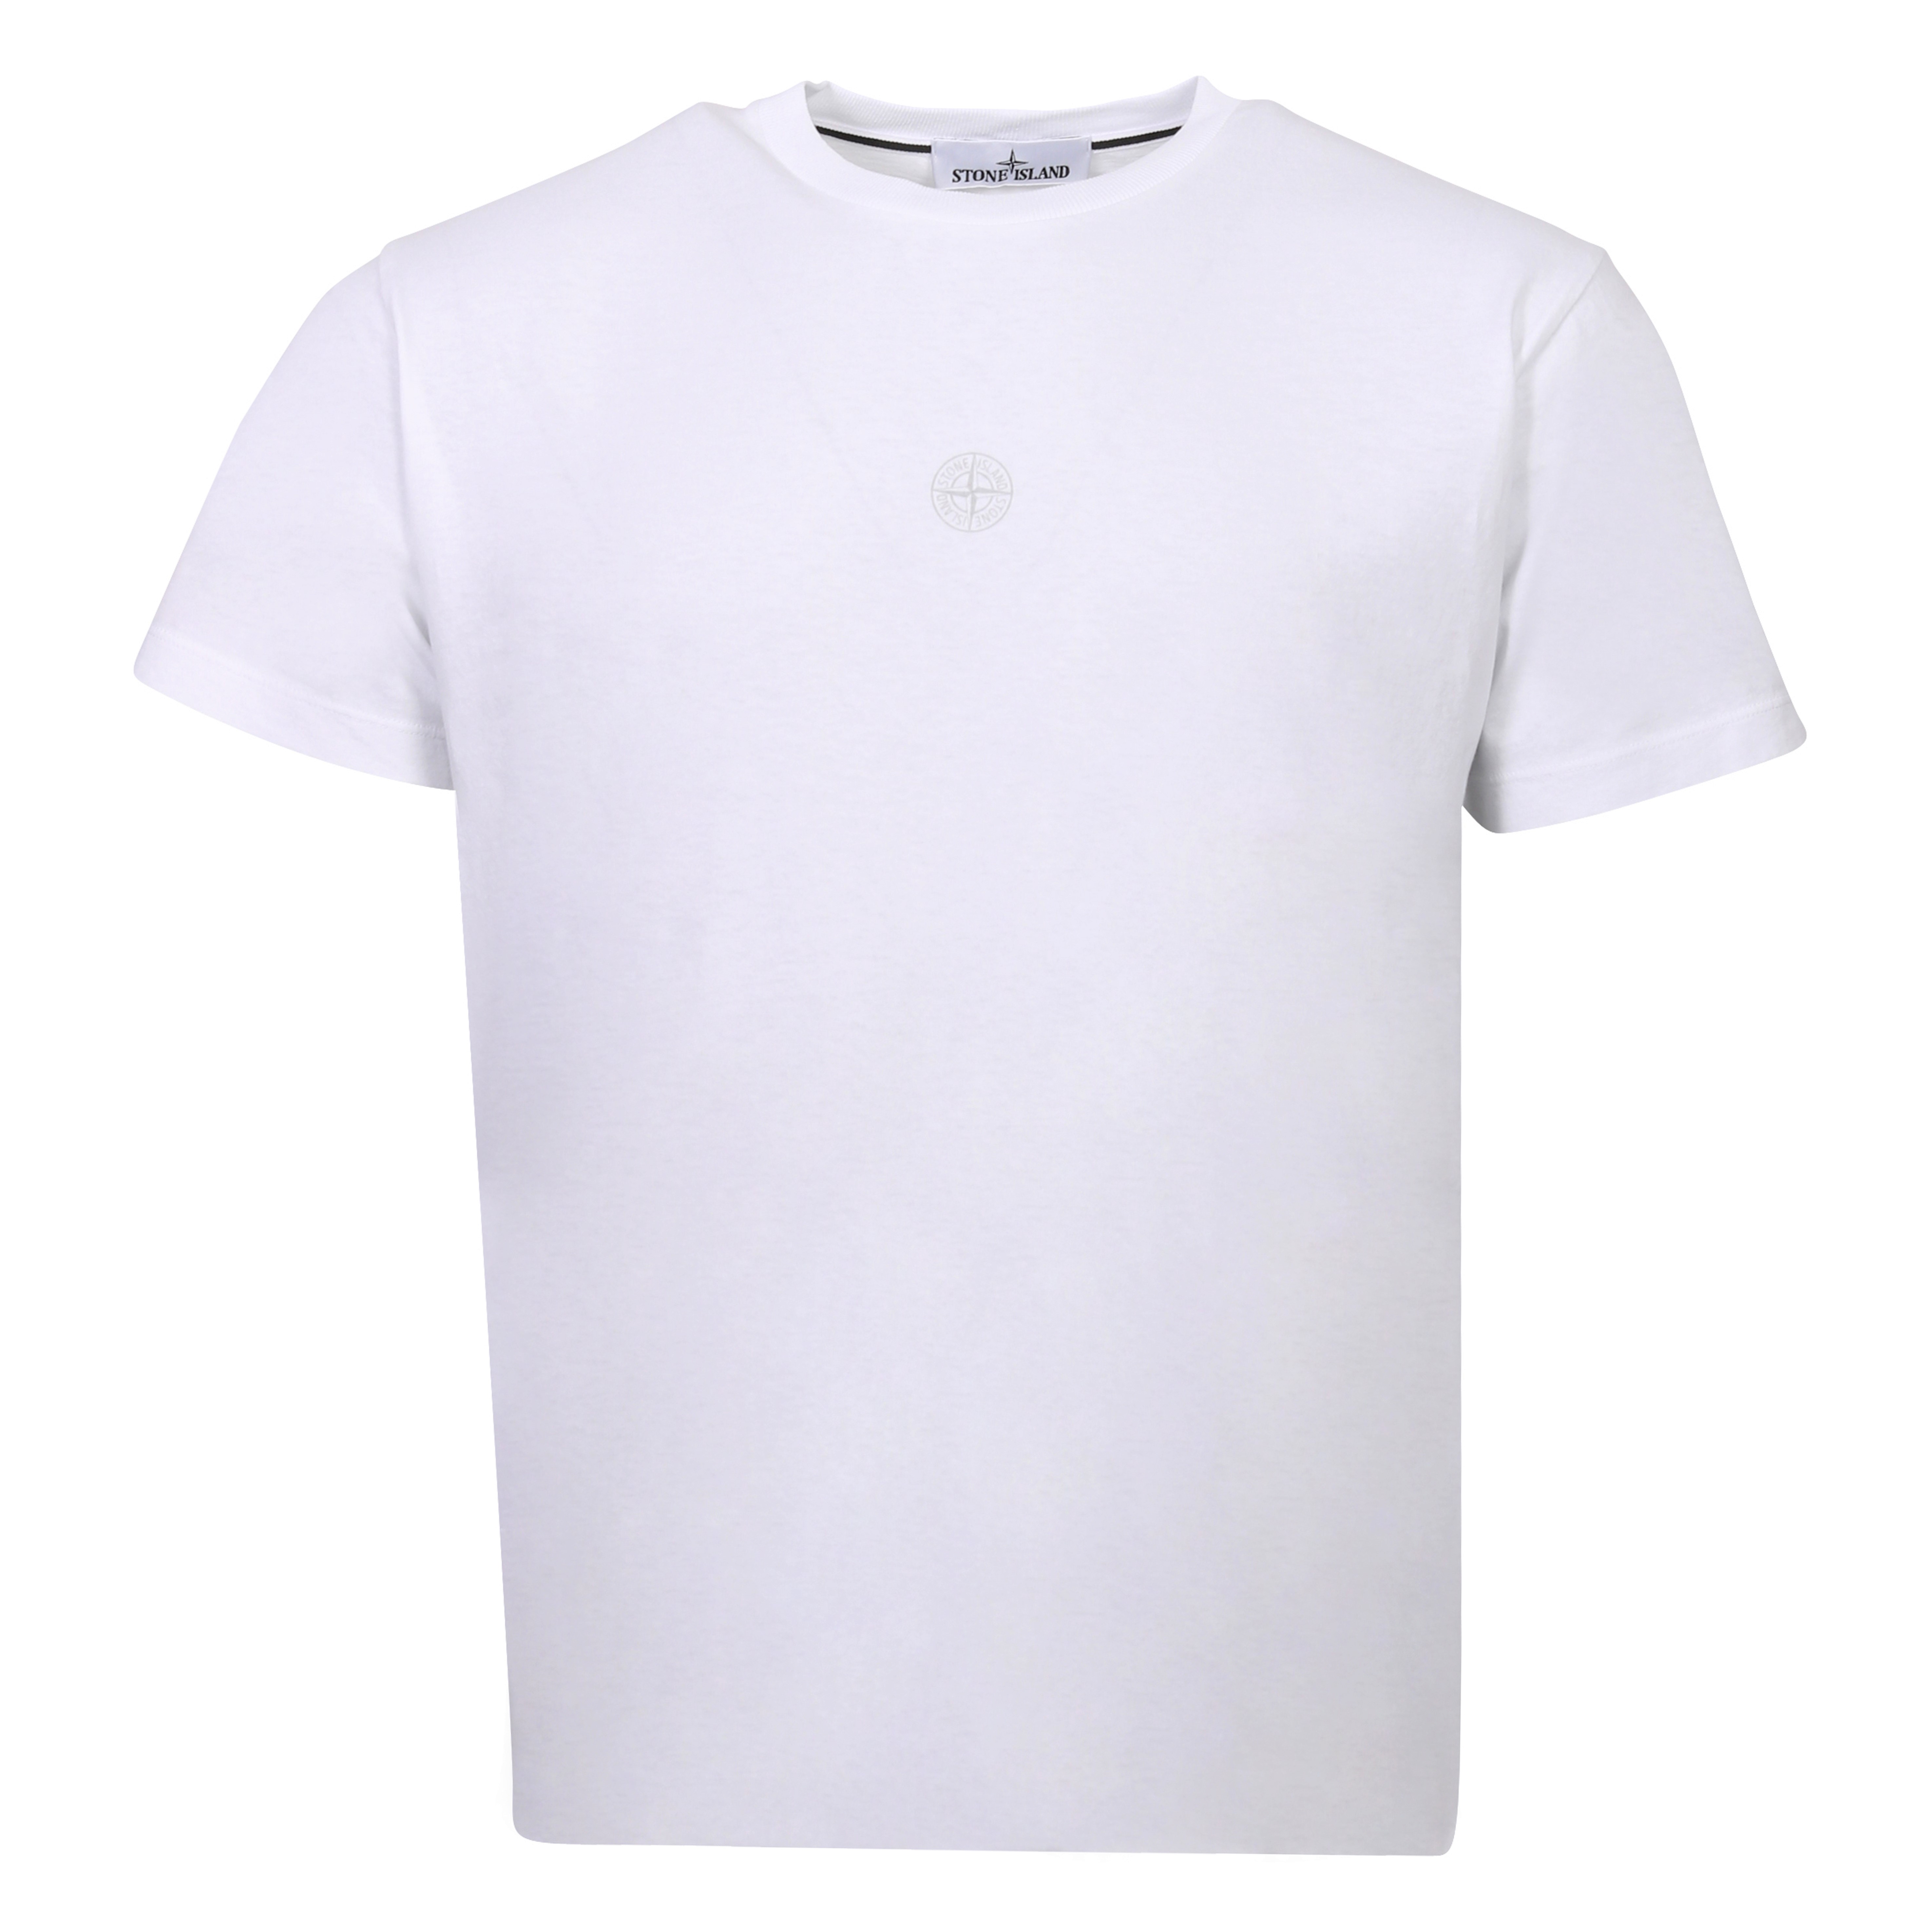 Stone Island Backprinted T-Shirt in White S